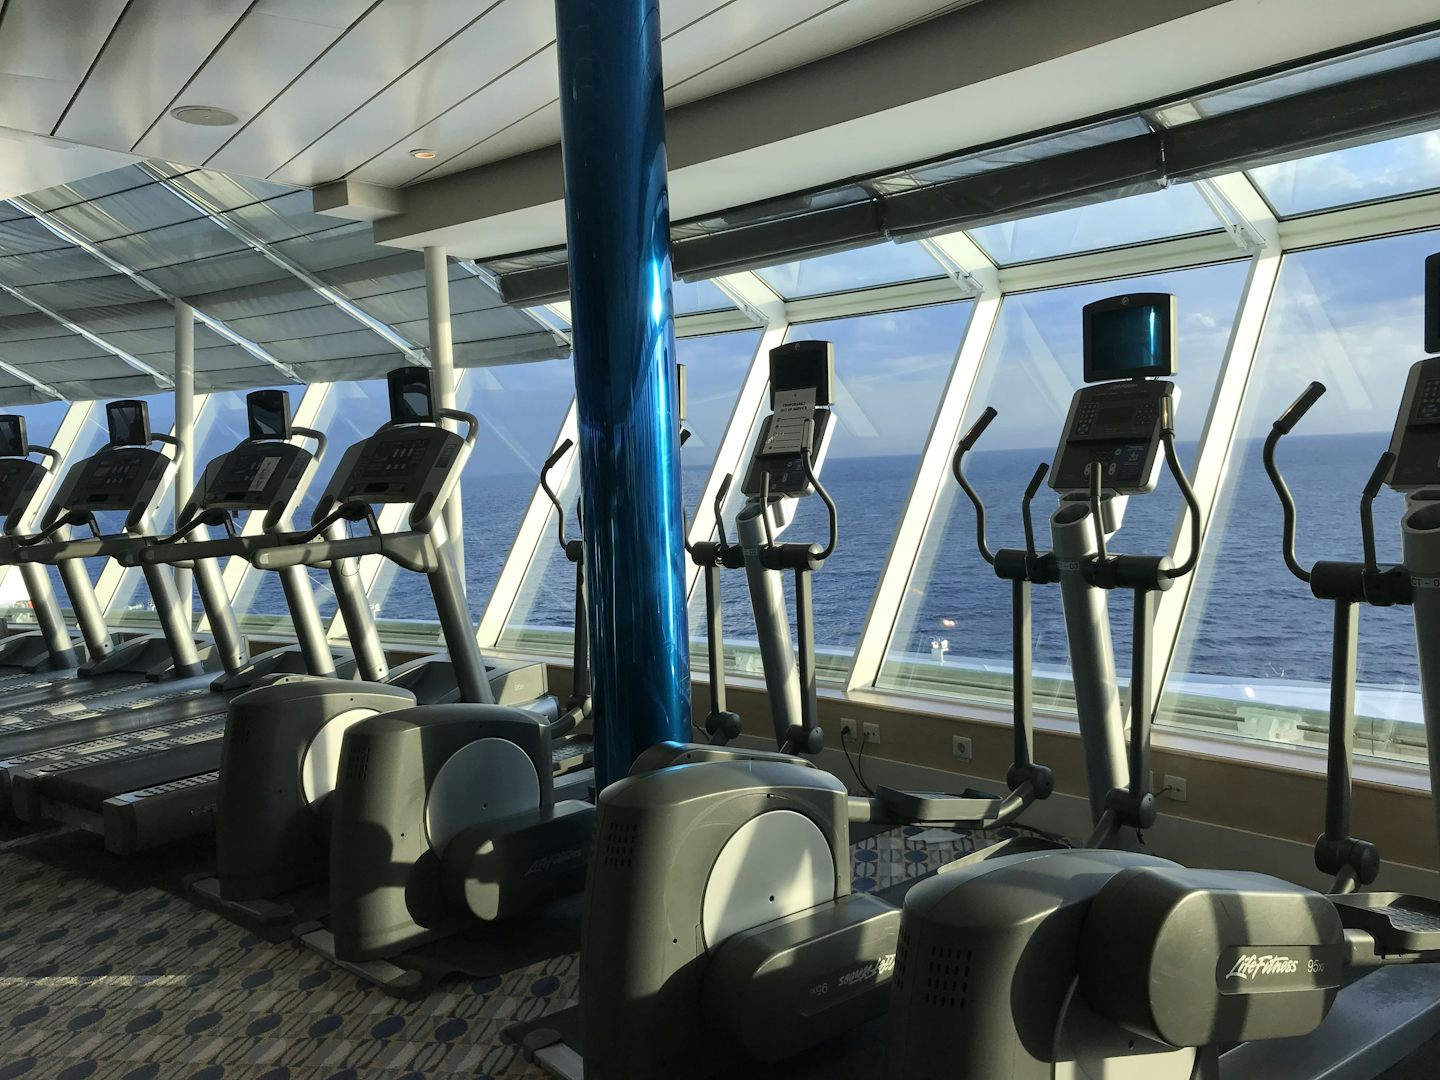 Amazing gym, spectacular views & great fitness classes as well.